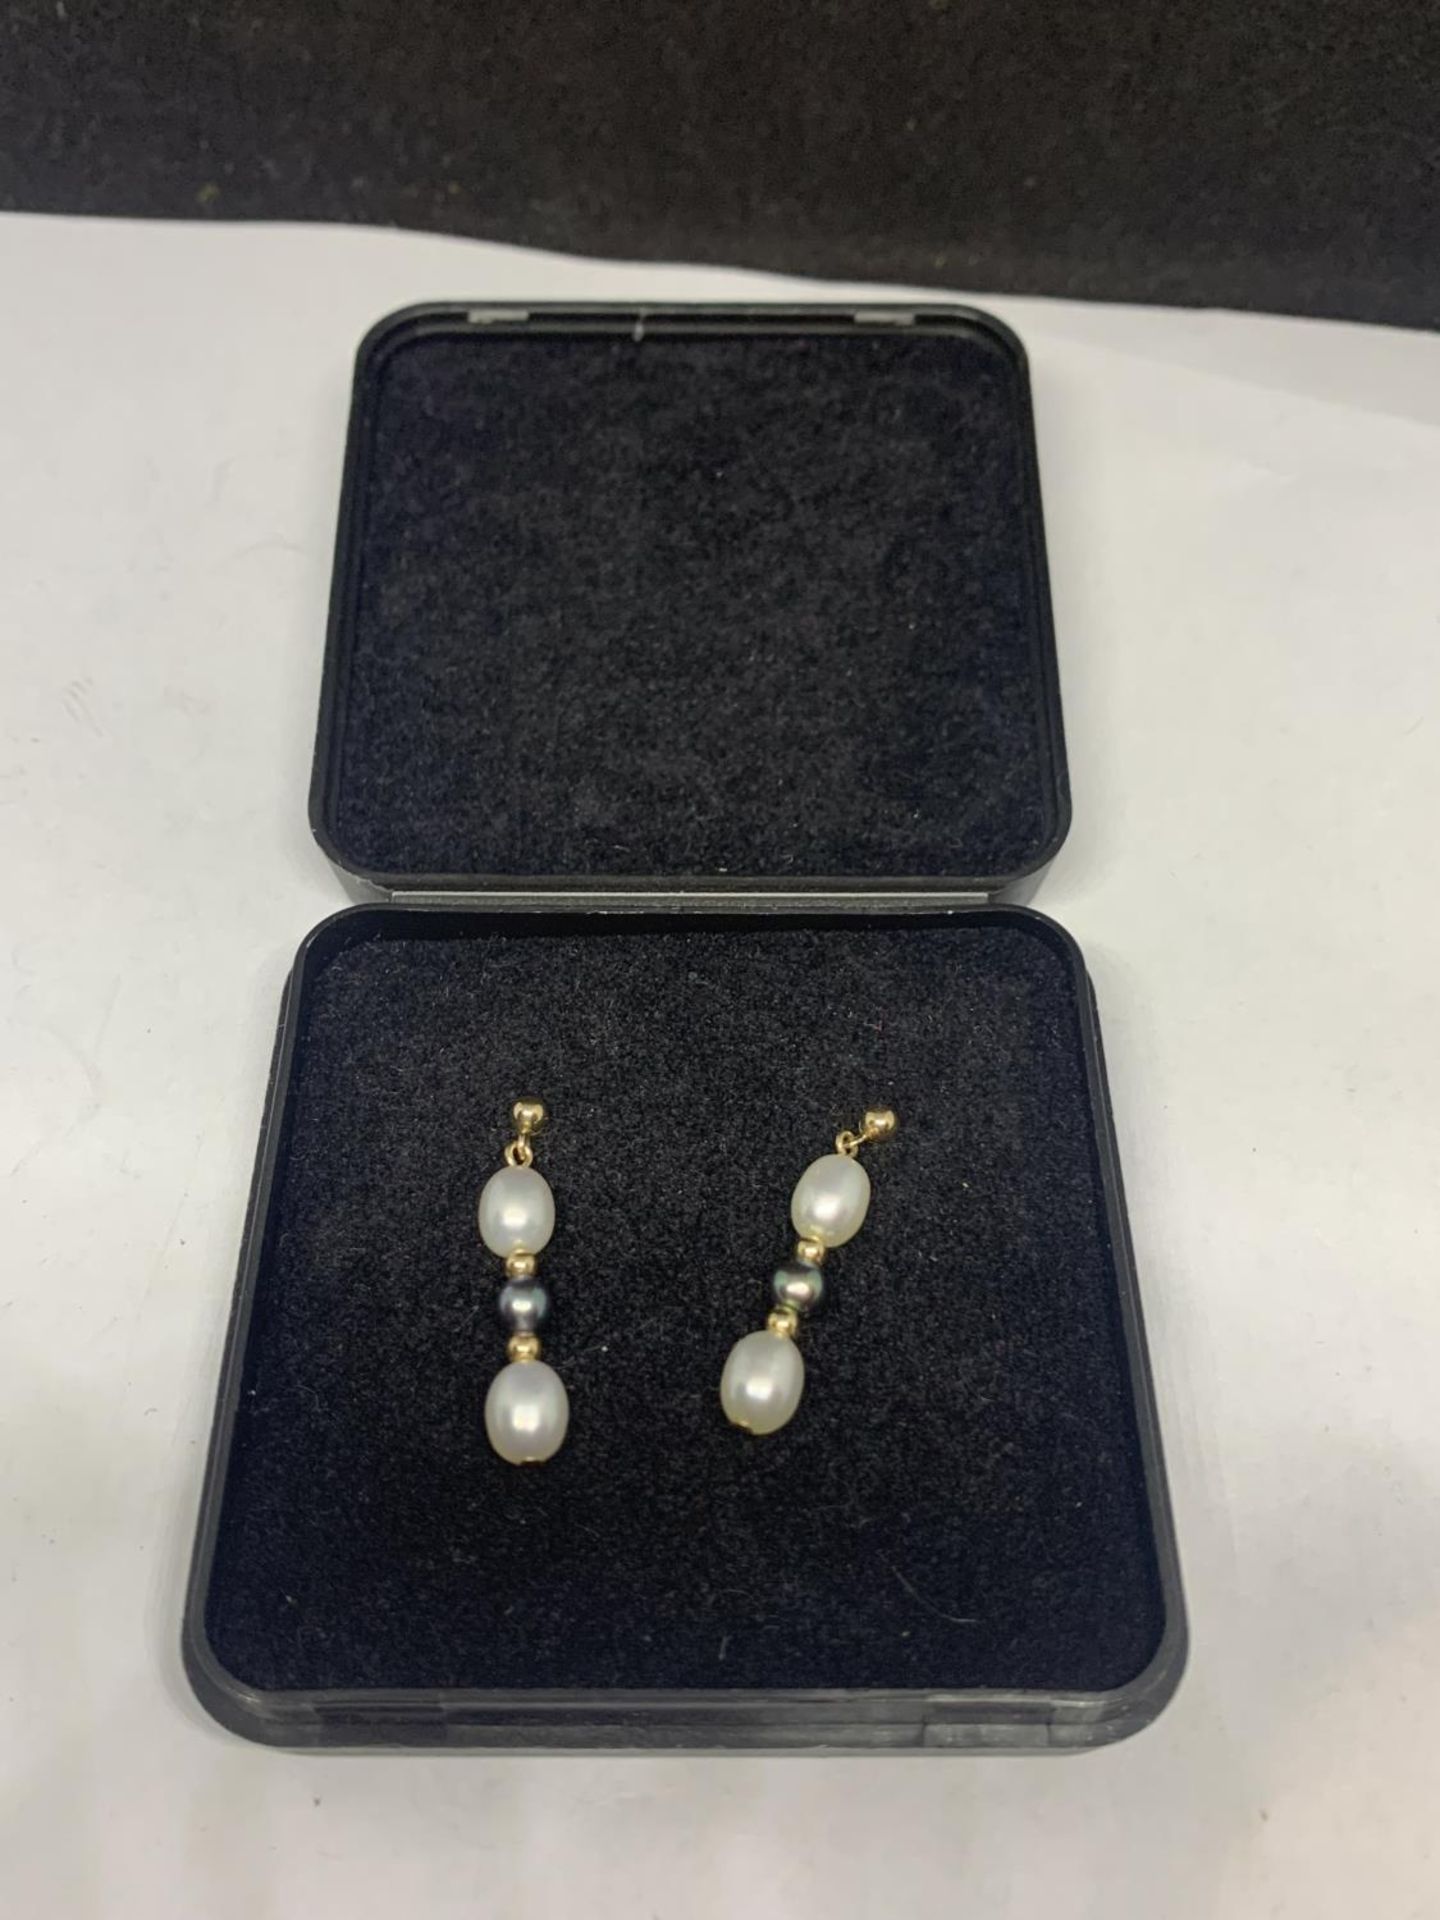 A PAIR OF 9 CARAT GOLD AND BEAD DROP EARRINGS IN A PRESENTATION BOX - Image 2 of 2